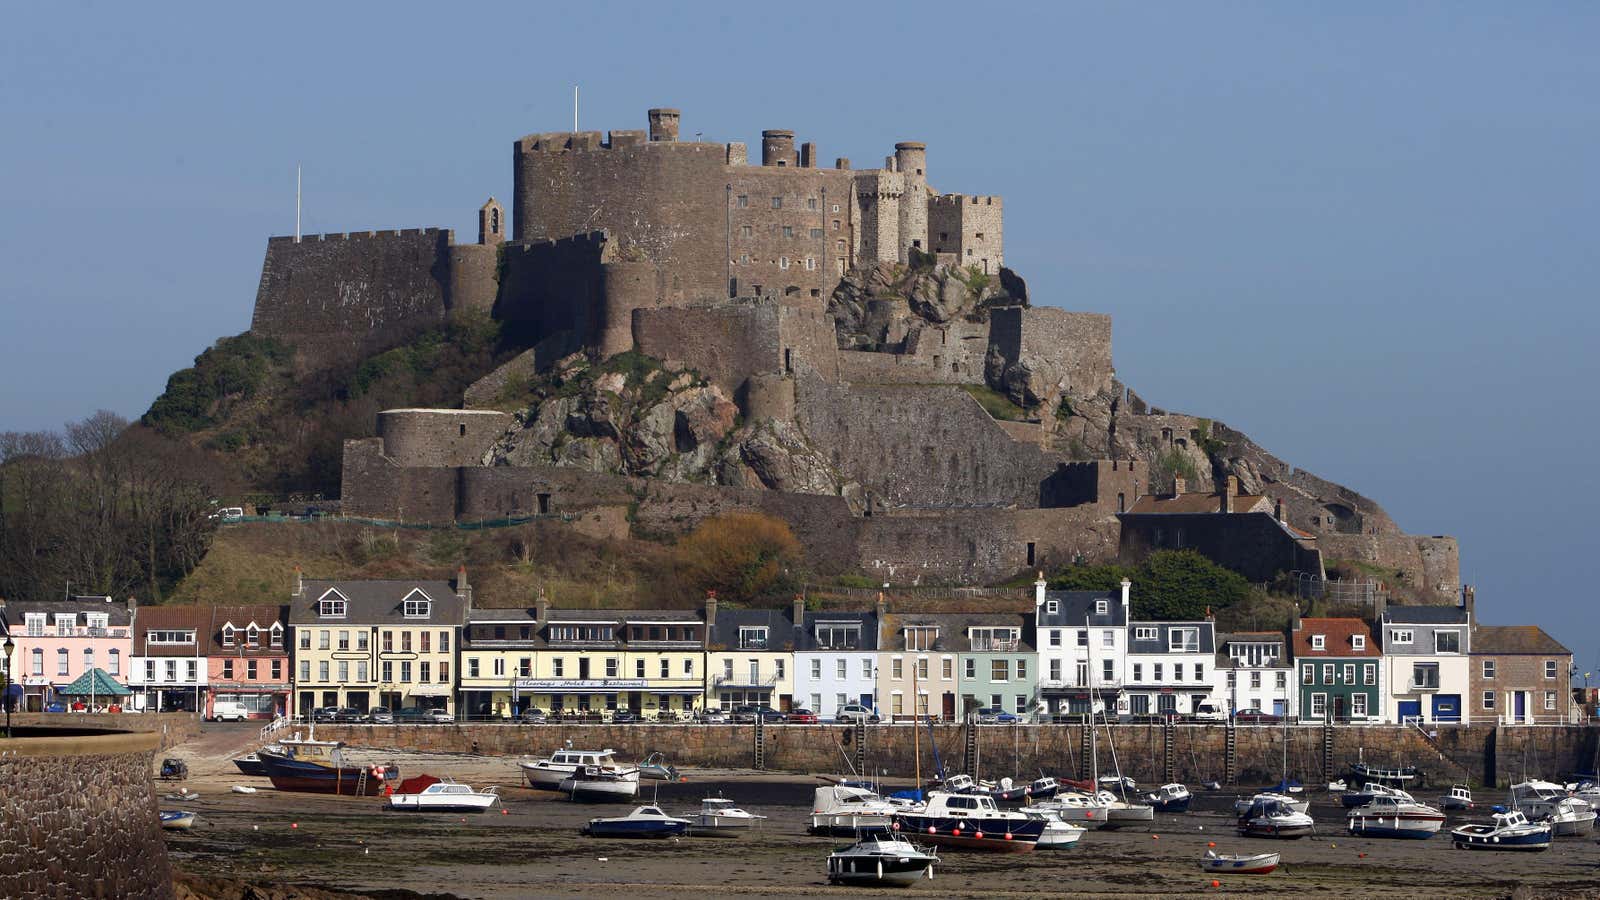 Jersey is under pressure over its tax haven status.